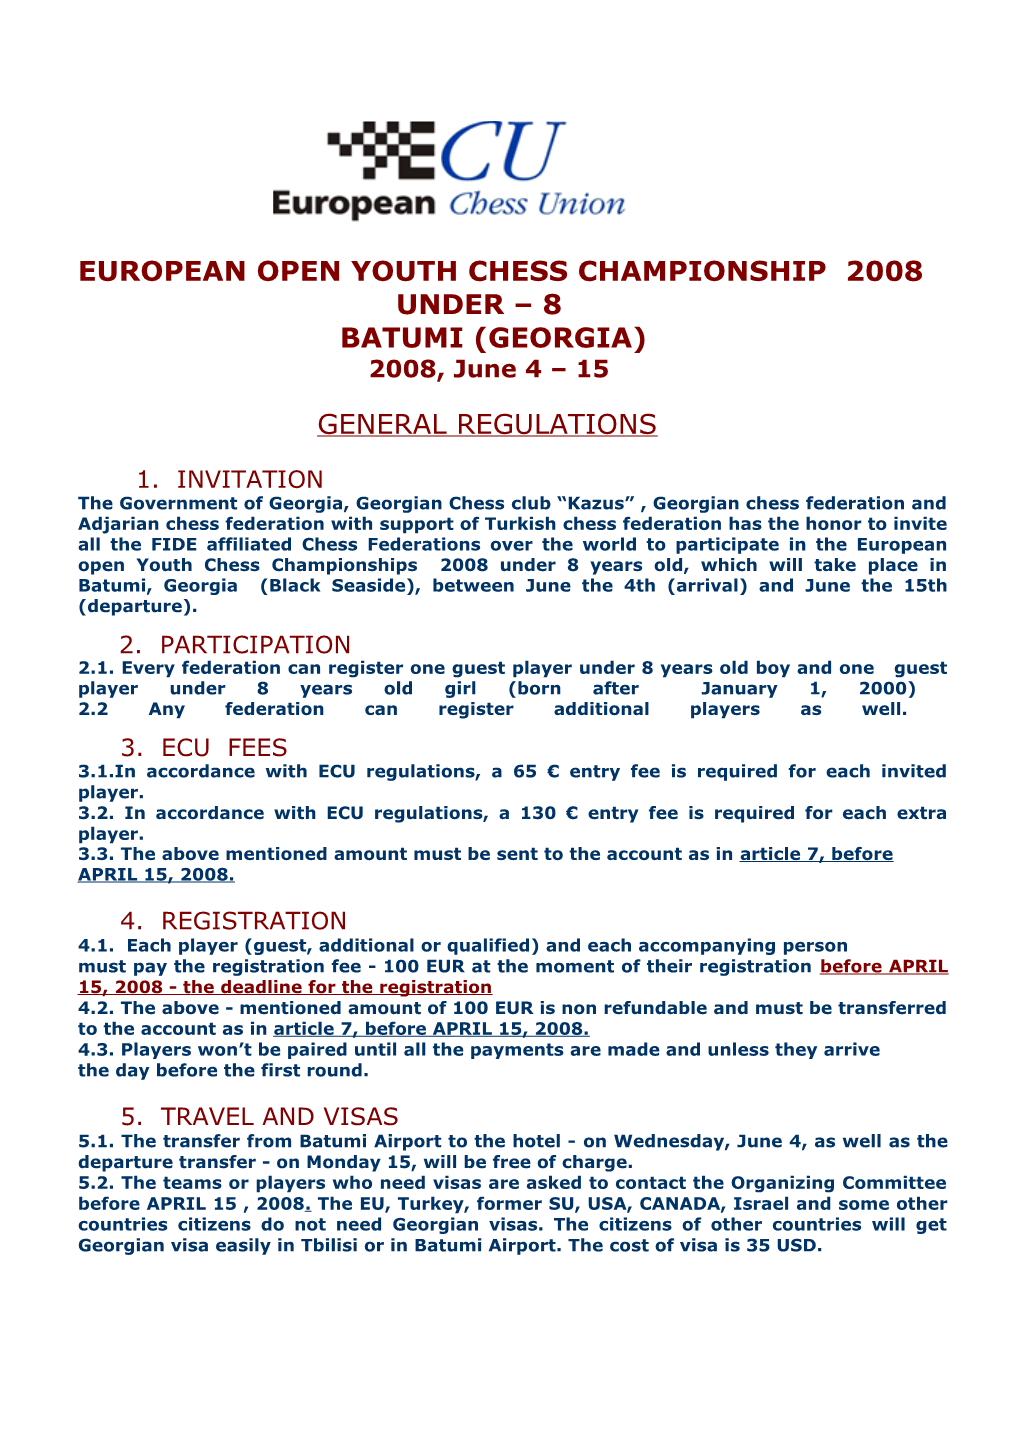 European Open Youth Chess Championship 2008